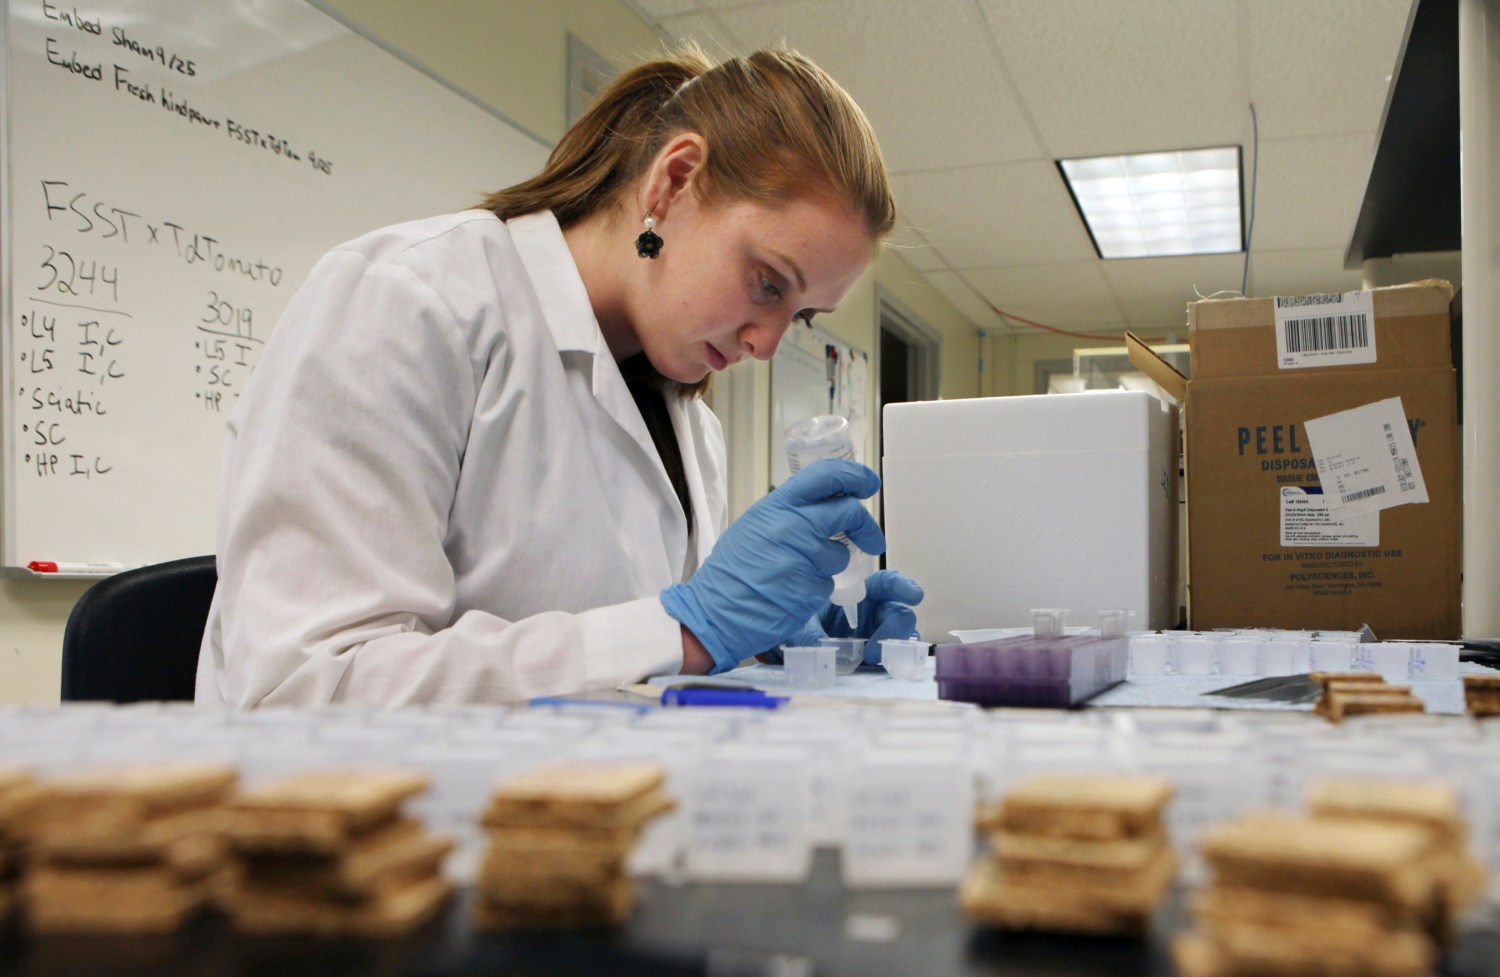 University of New England biomedical research lab manager Brittany Roy works in Ian Meng's laboratory in Biddeford